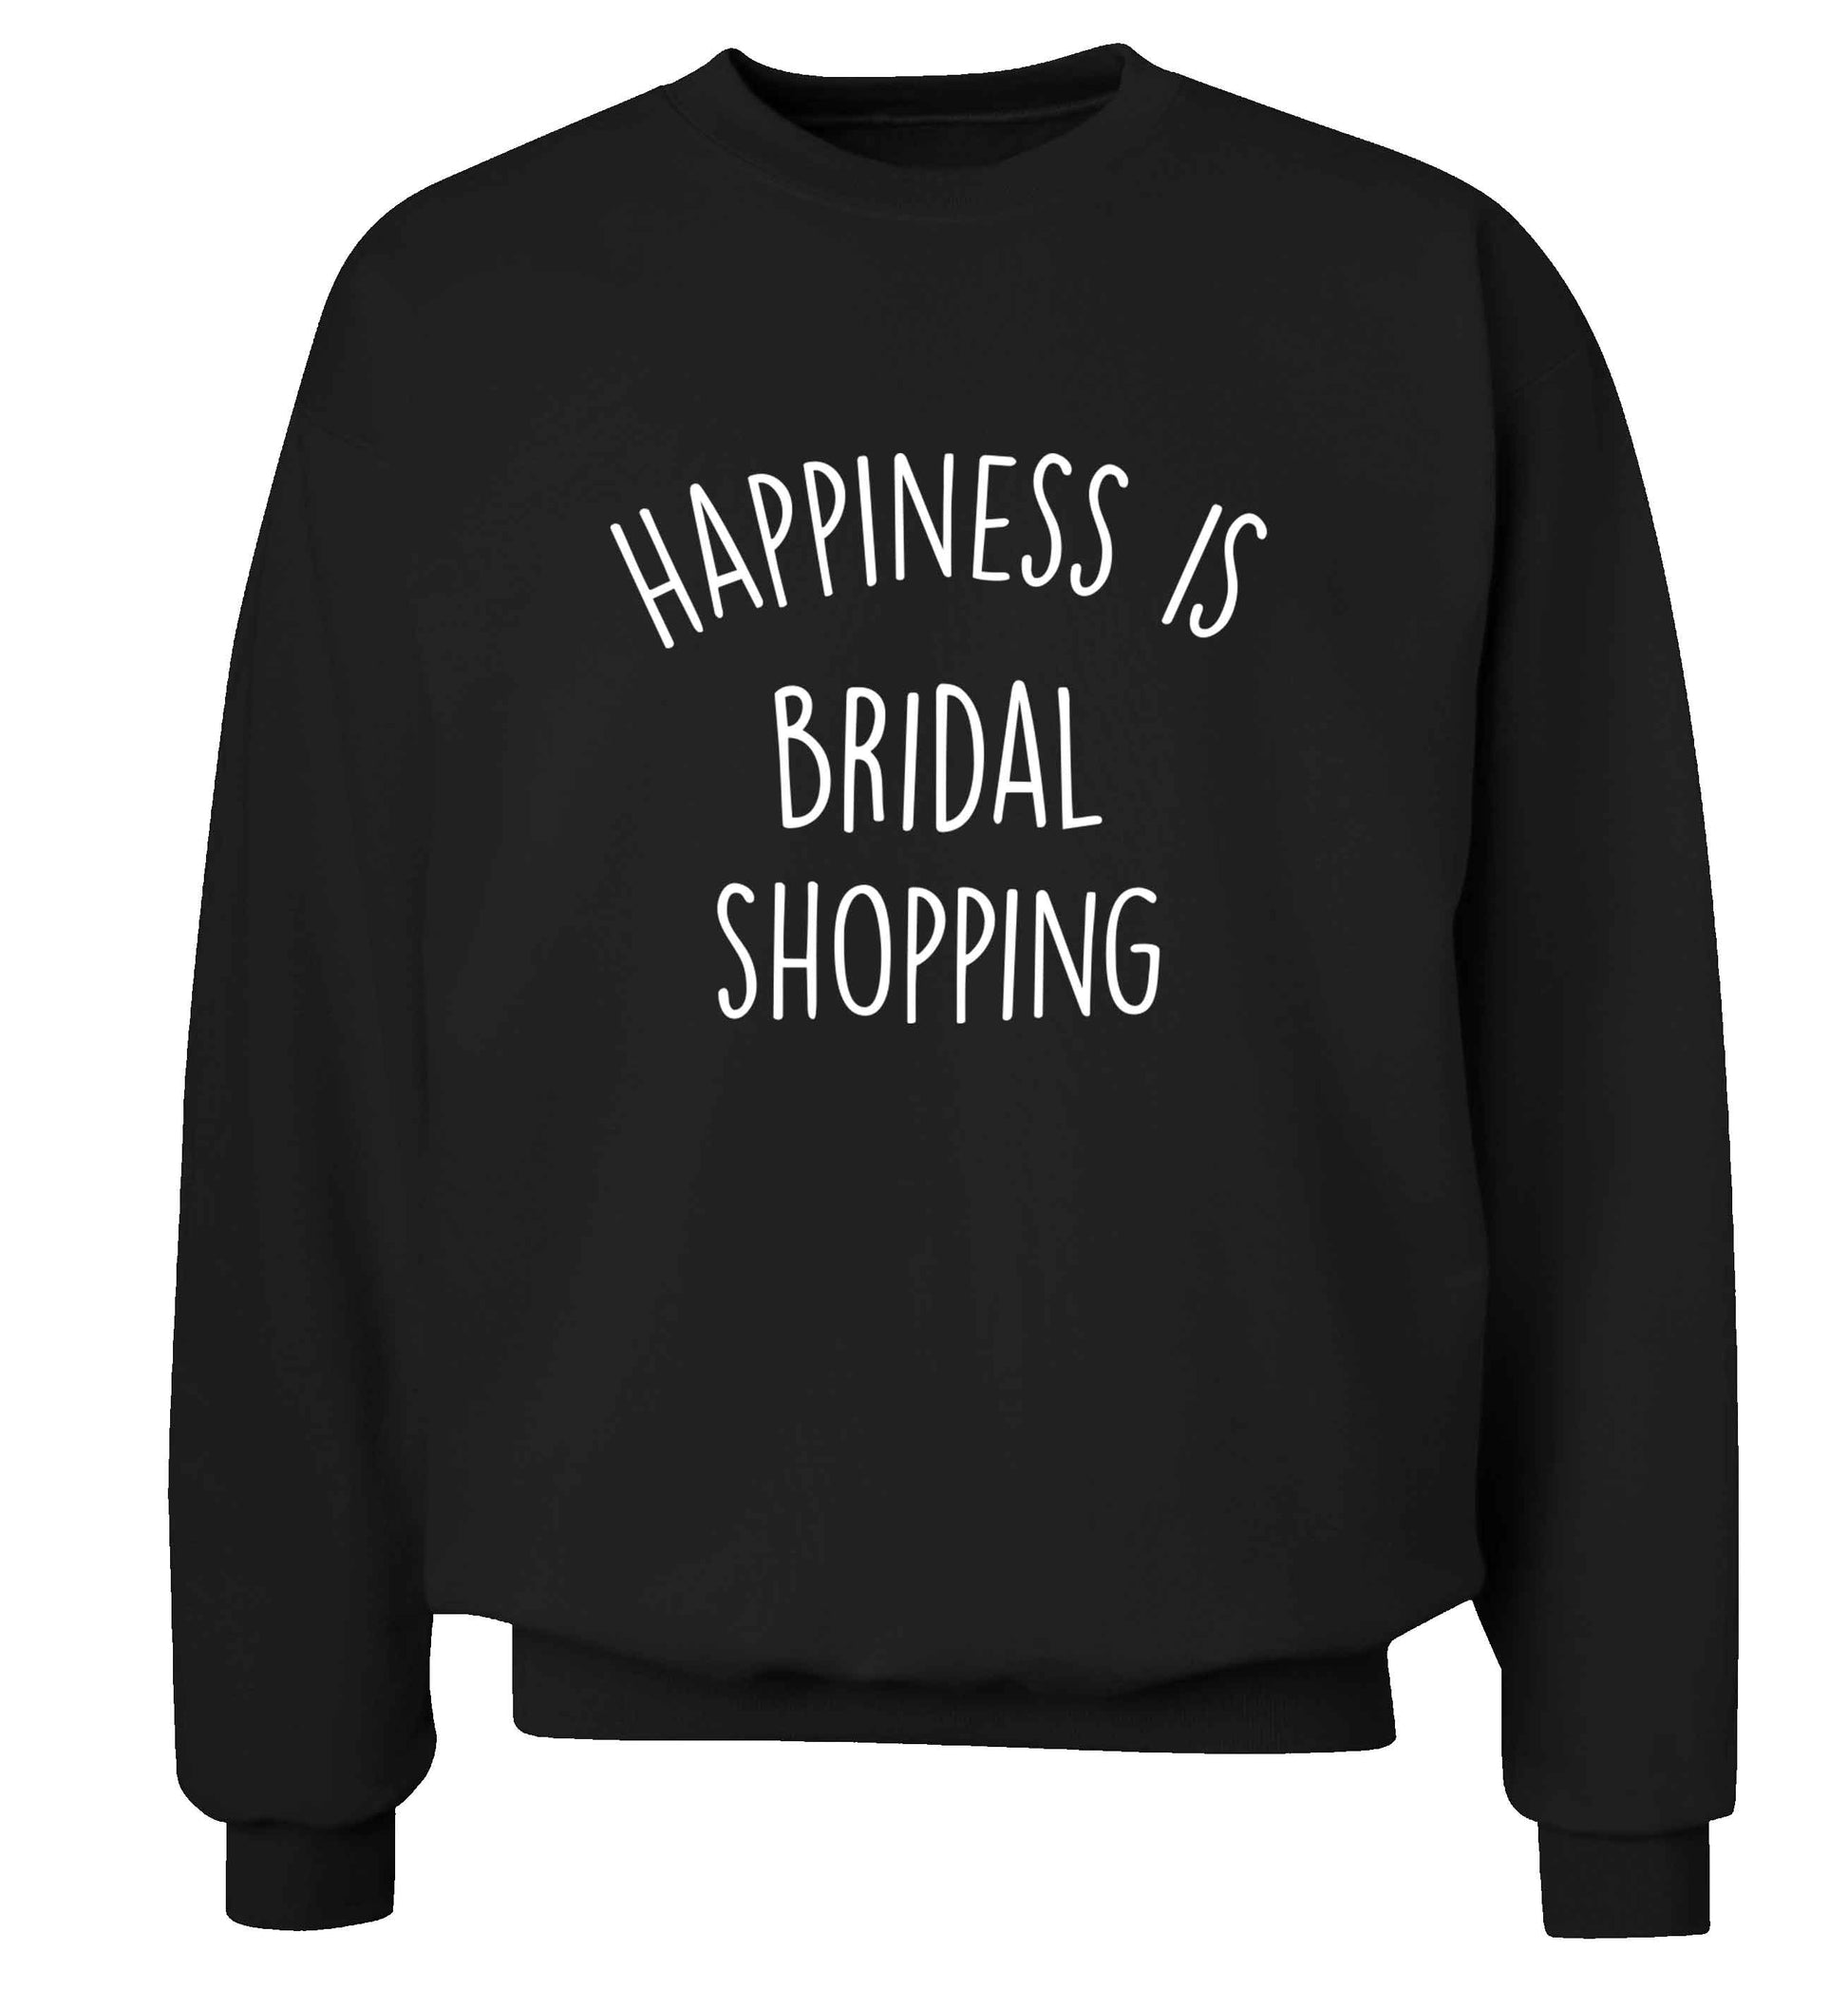 Happiness is bridal shopping adult's unisex black sweater 2XL